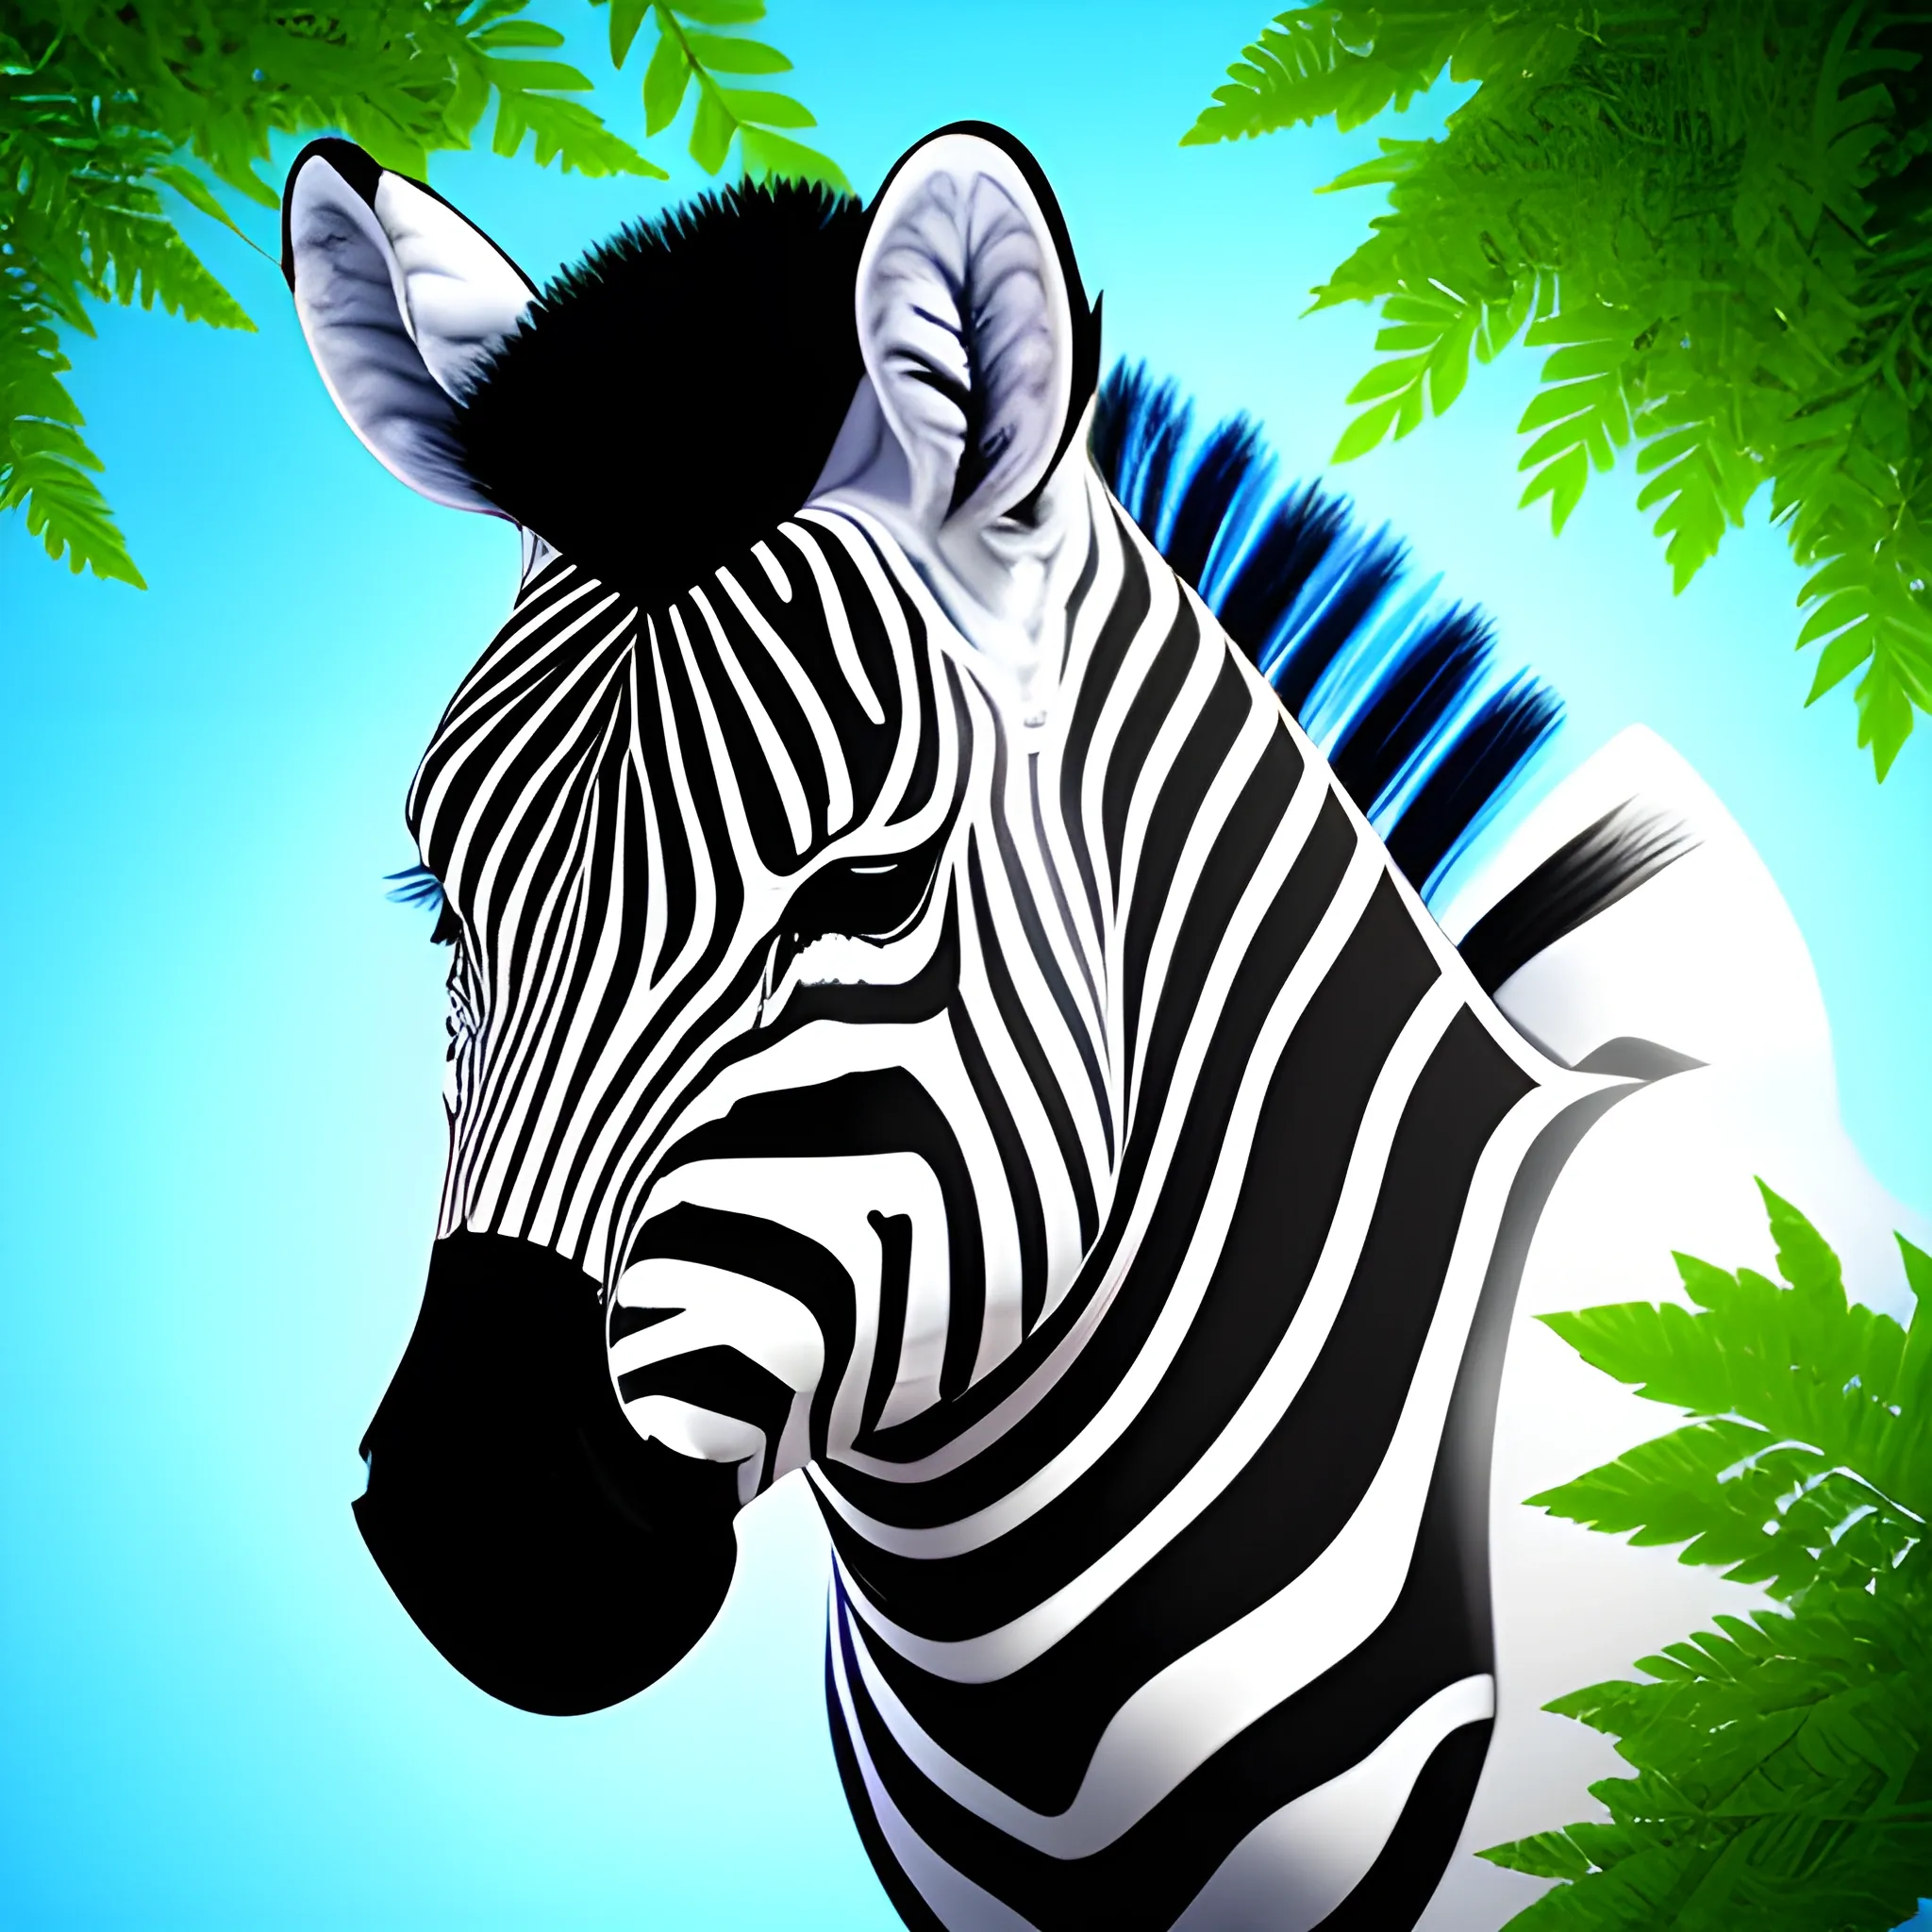 the upper part of the zebra looks like both a human head and an artificial intelligence head on a background of green flowering trees in blue colors in the theme of the future of artificial intelligence, quality 128k